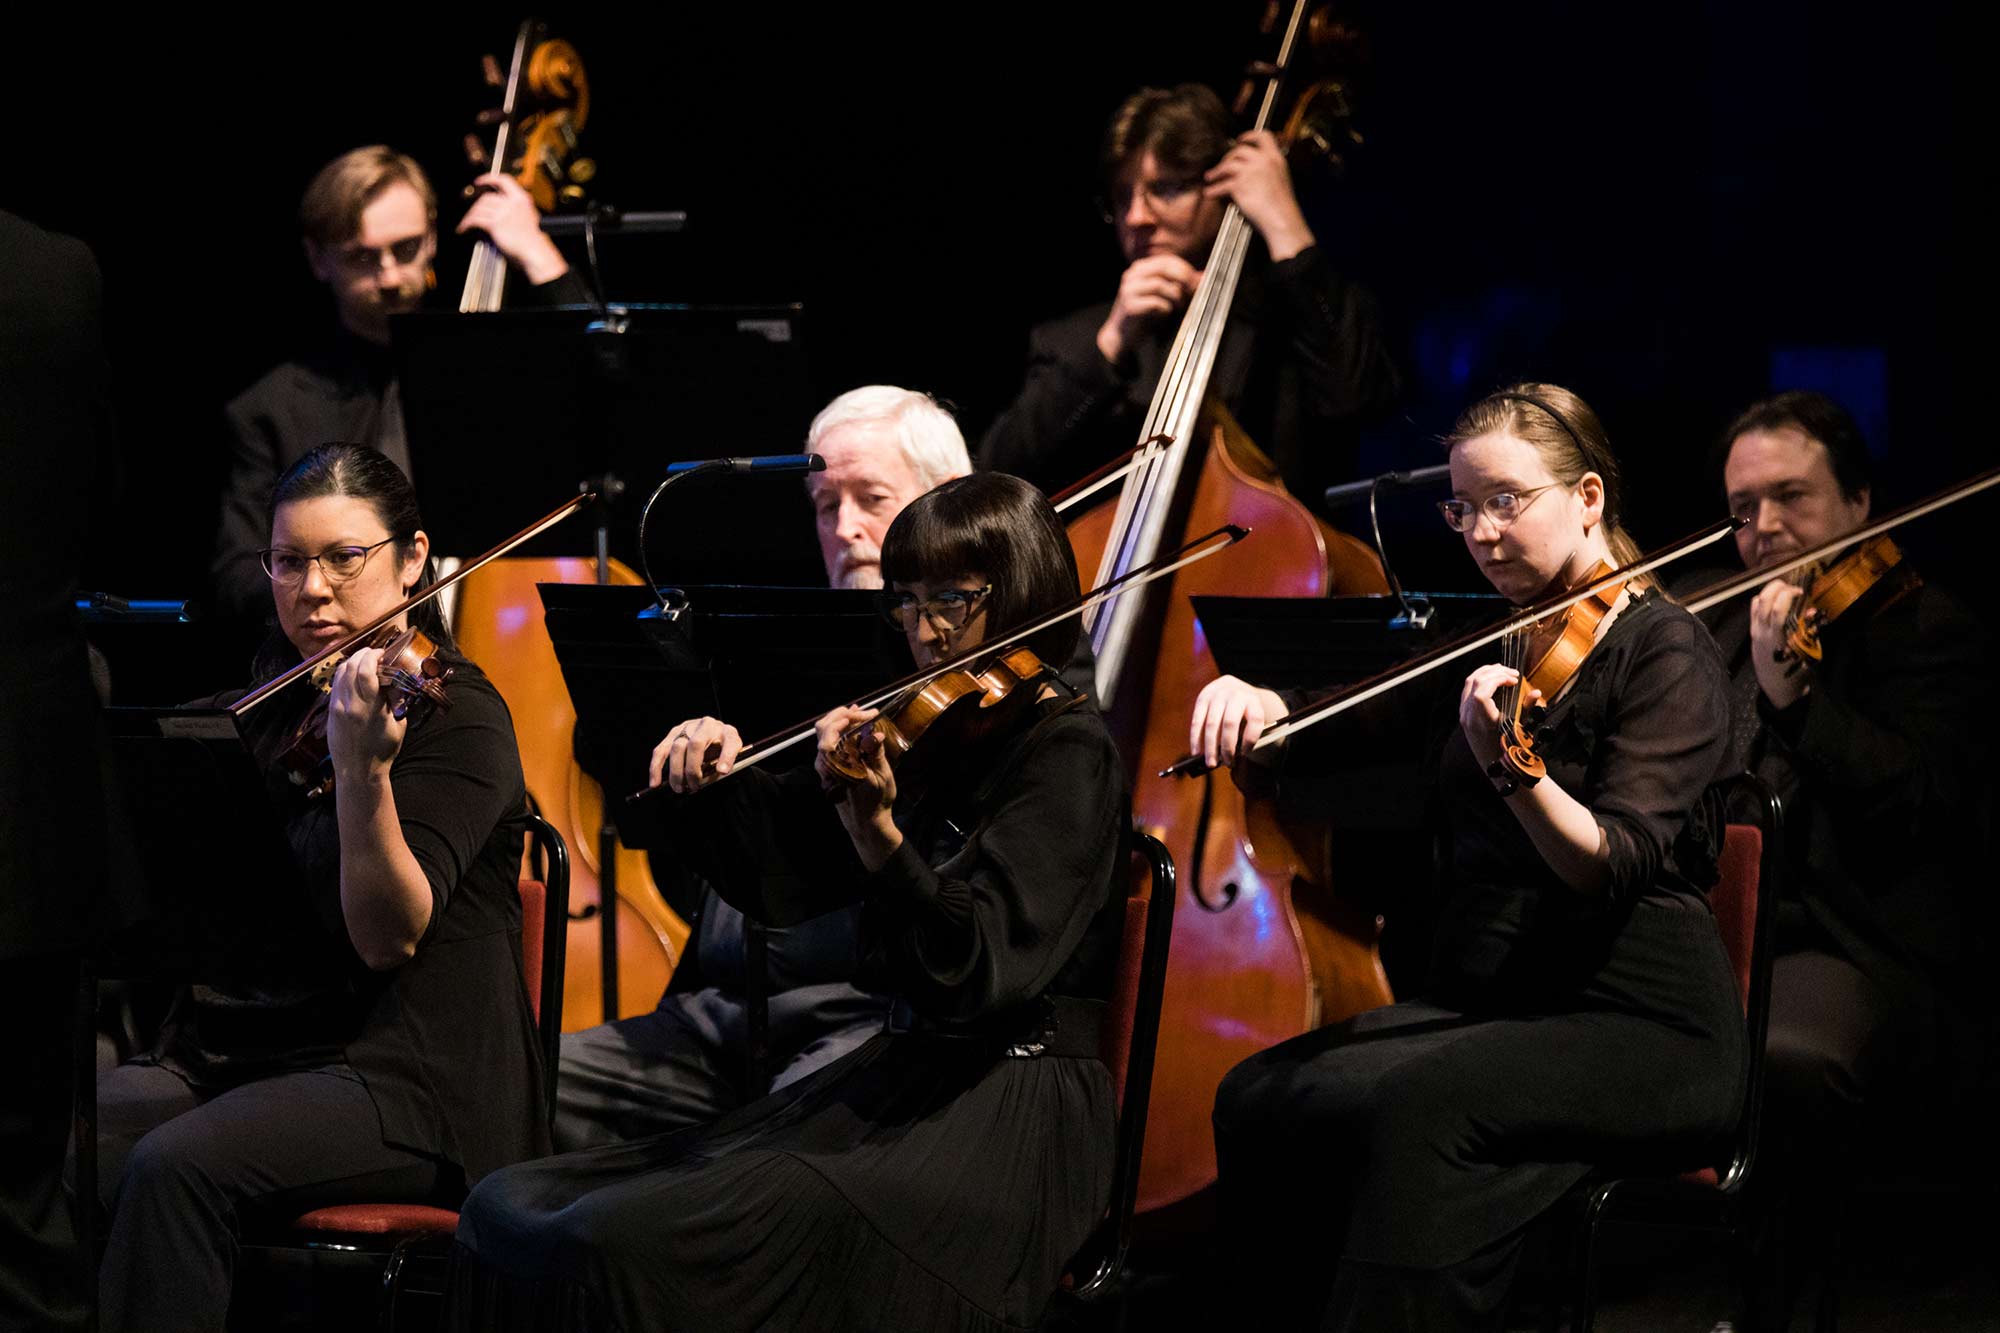 orchestra in concert